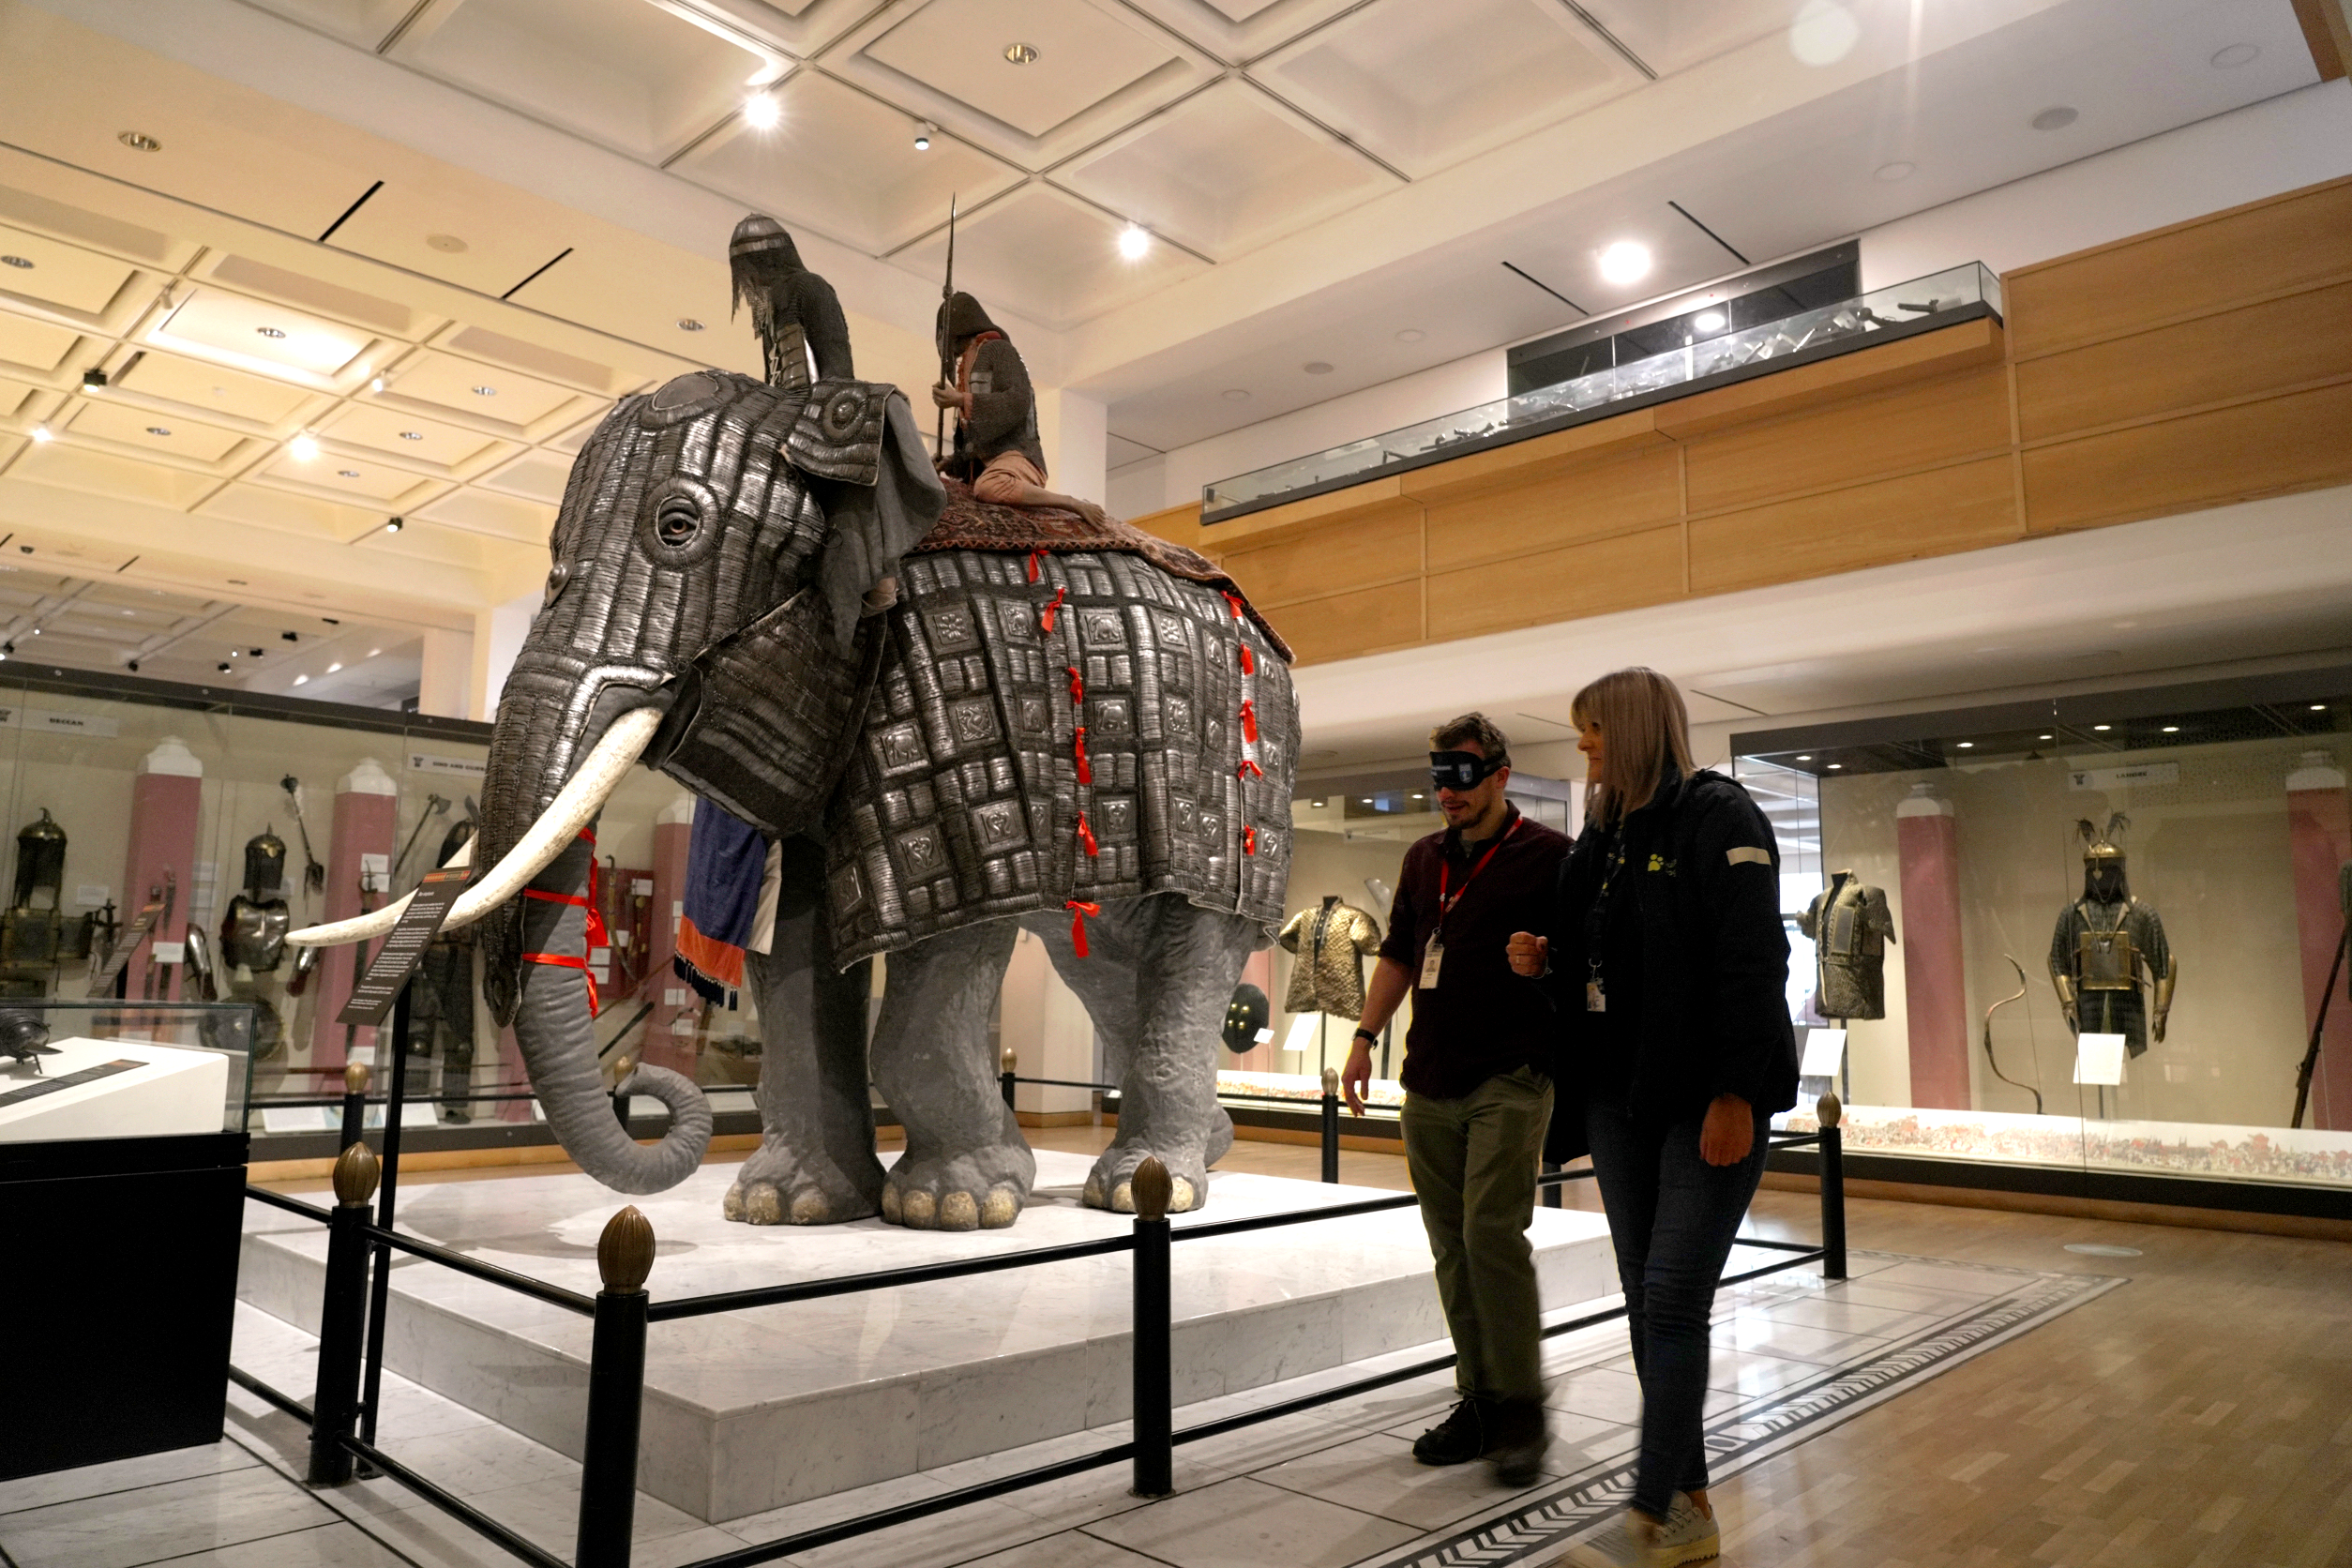 Guide Dogs staff member Kelle guides a Royal Armouries staff member around an armoured elephant exhibit at the museum